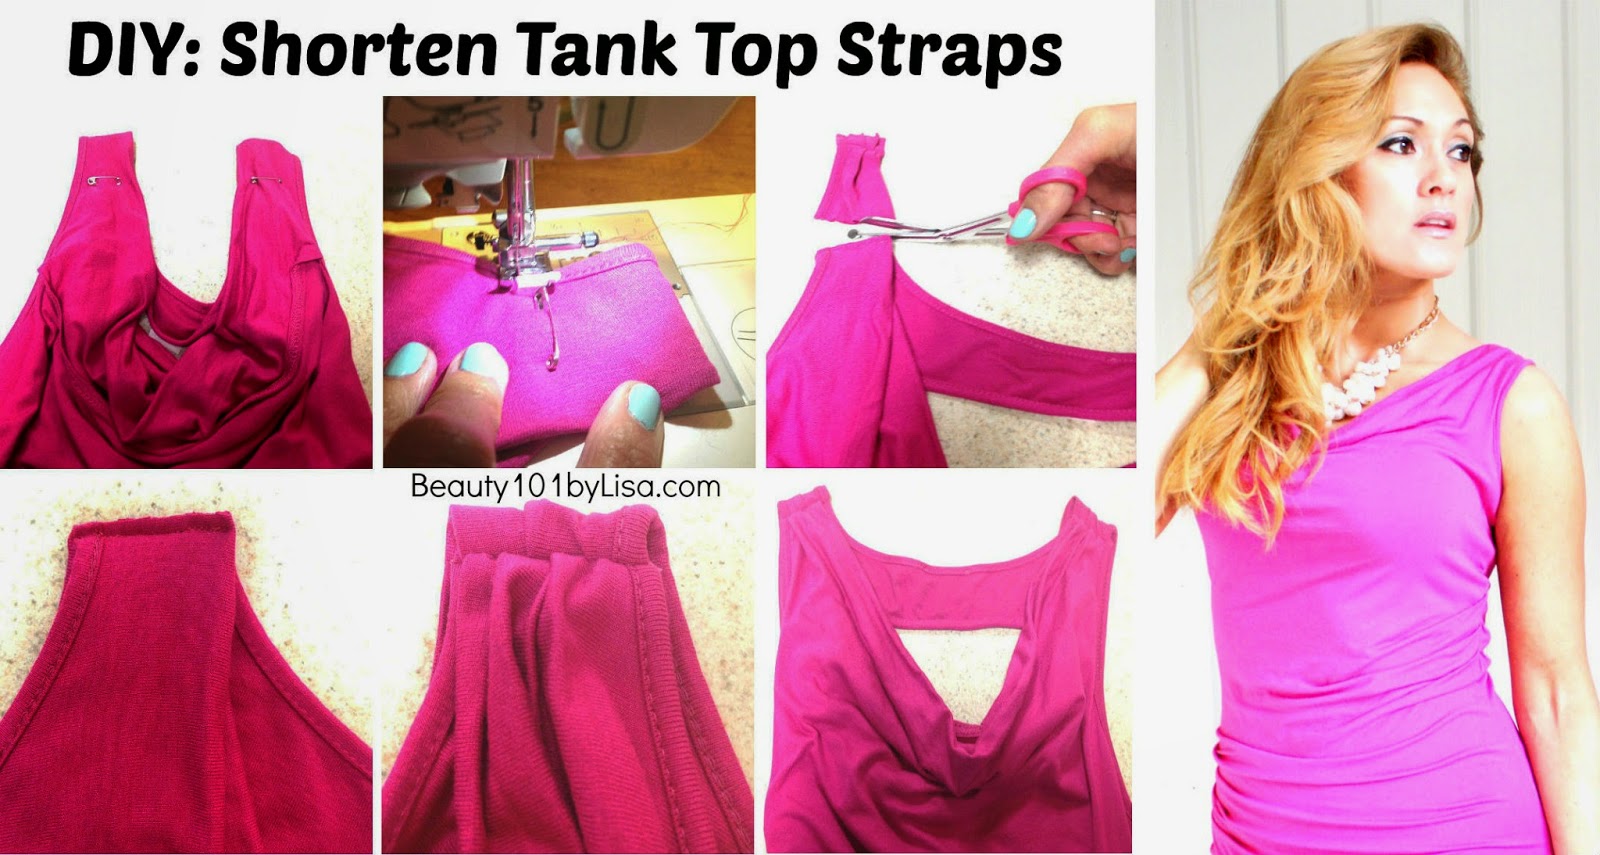 How to make straps shorter - Shorten straps on shirt or dress - Easy DIY  clothing alterations 